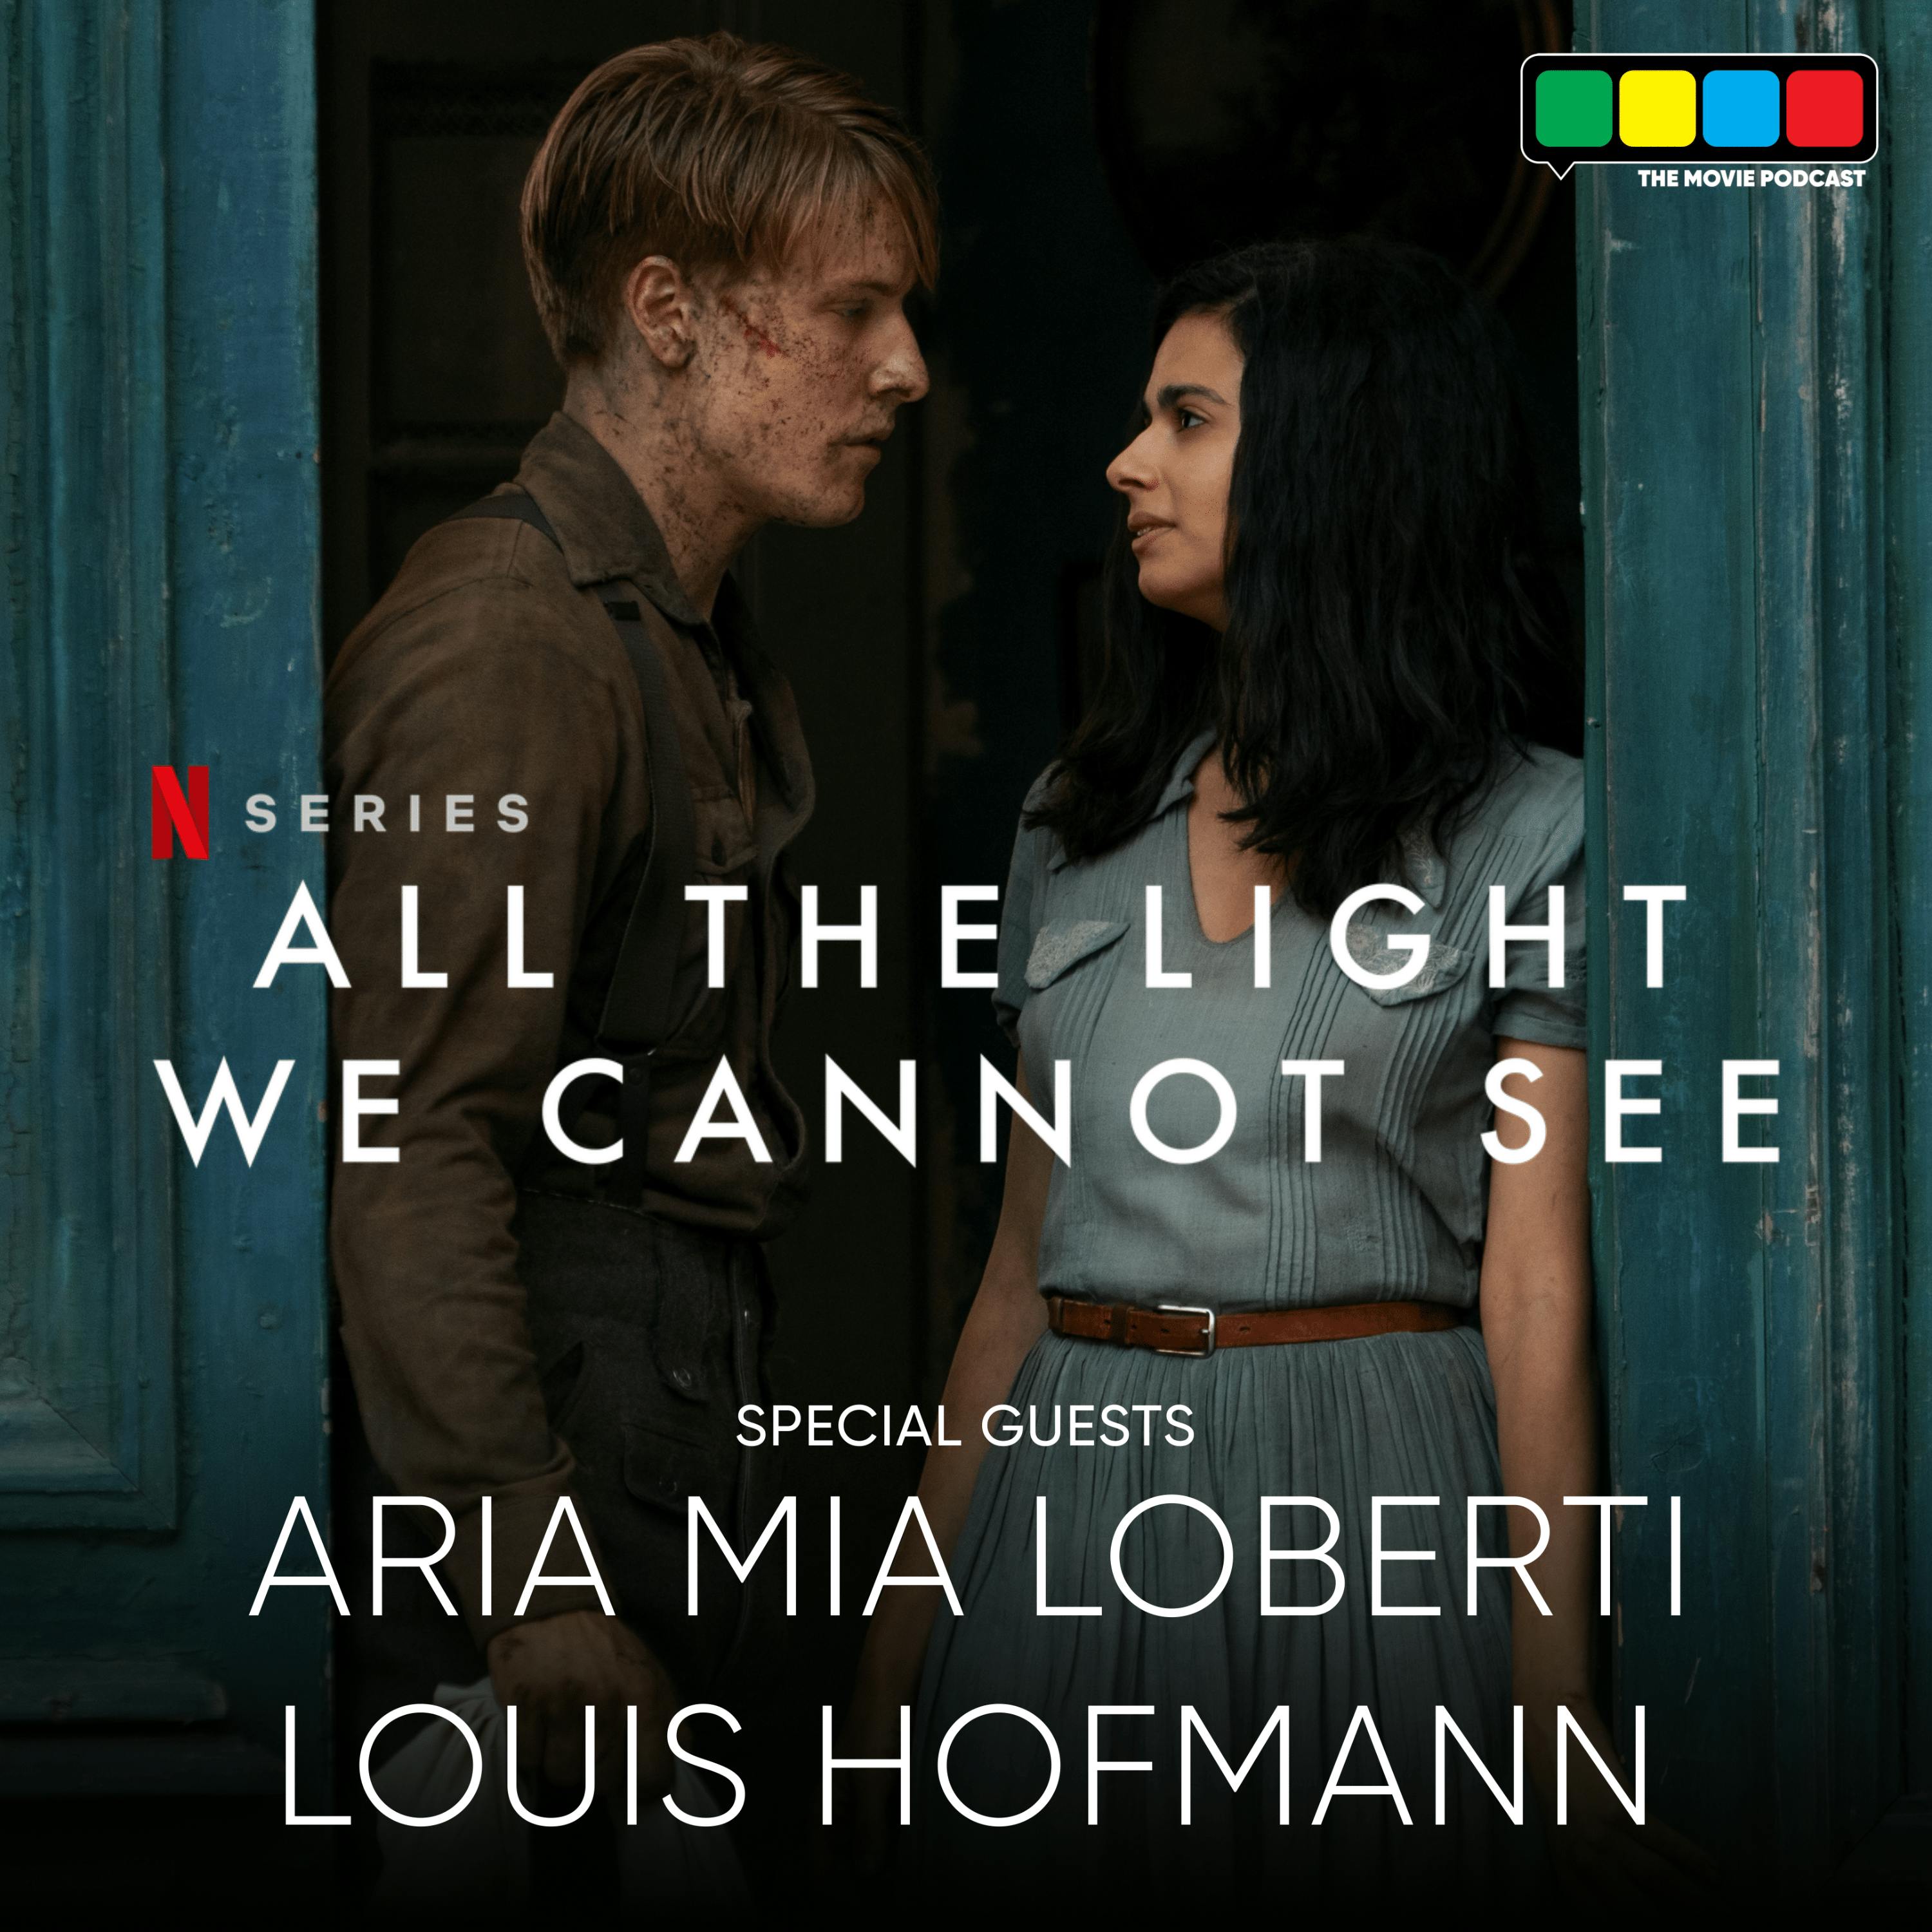 All the Light We Cannot See Interview with Aria Mia Loberti and Louis Hofmann (Netflix)